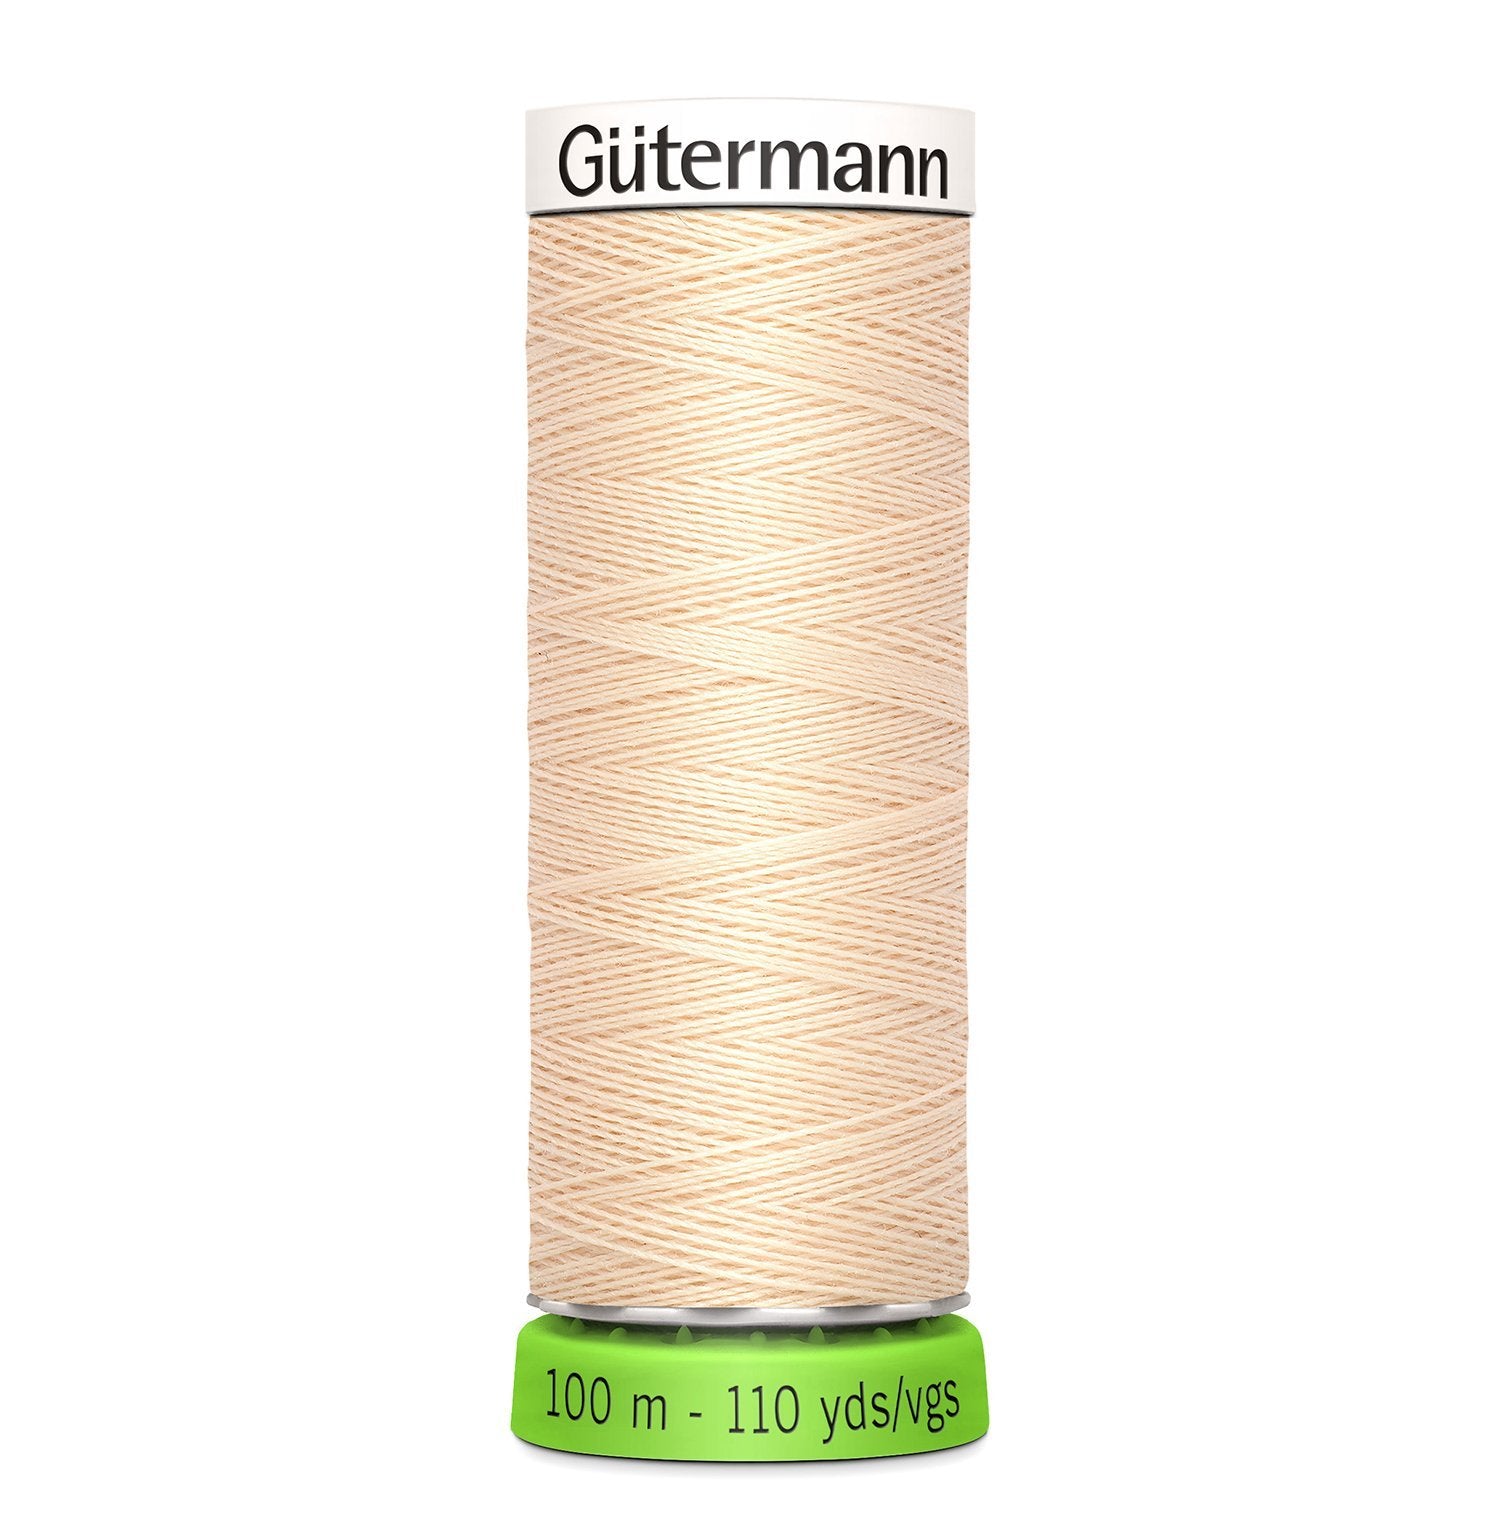 Gutermann Recycled Thread 100m, Colour 5 from Jaycotts Sewing Supplies